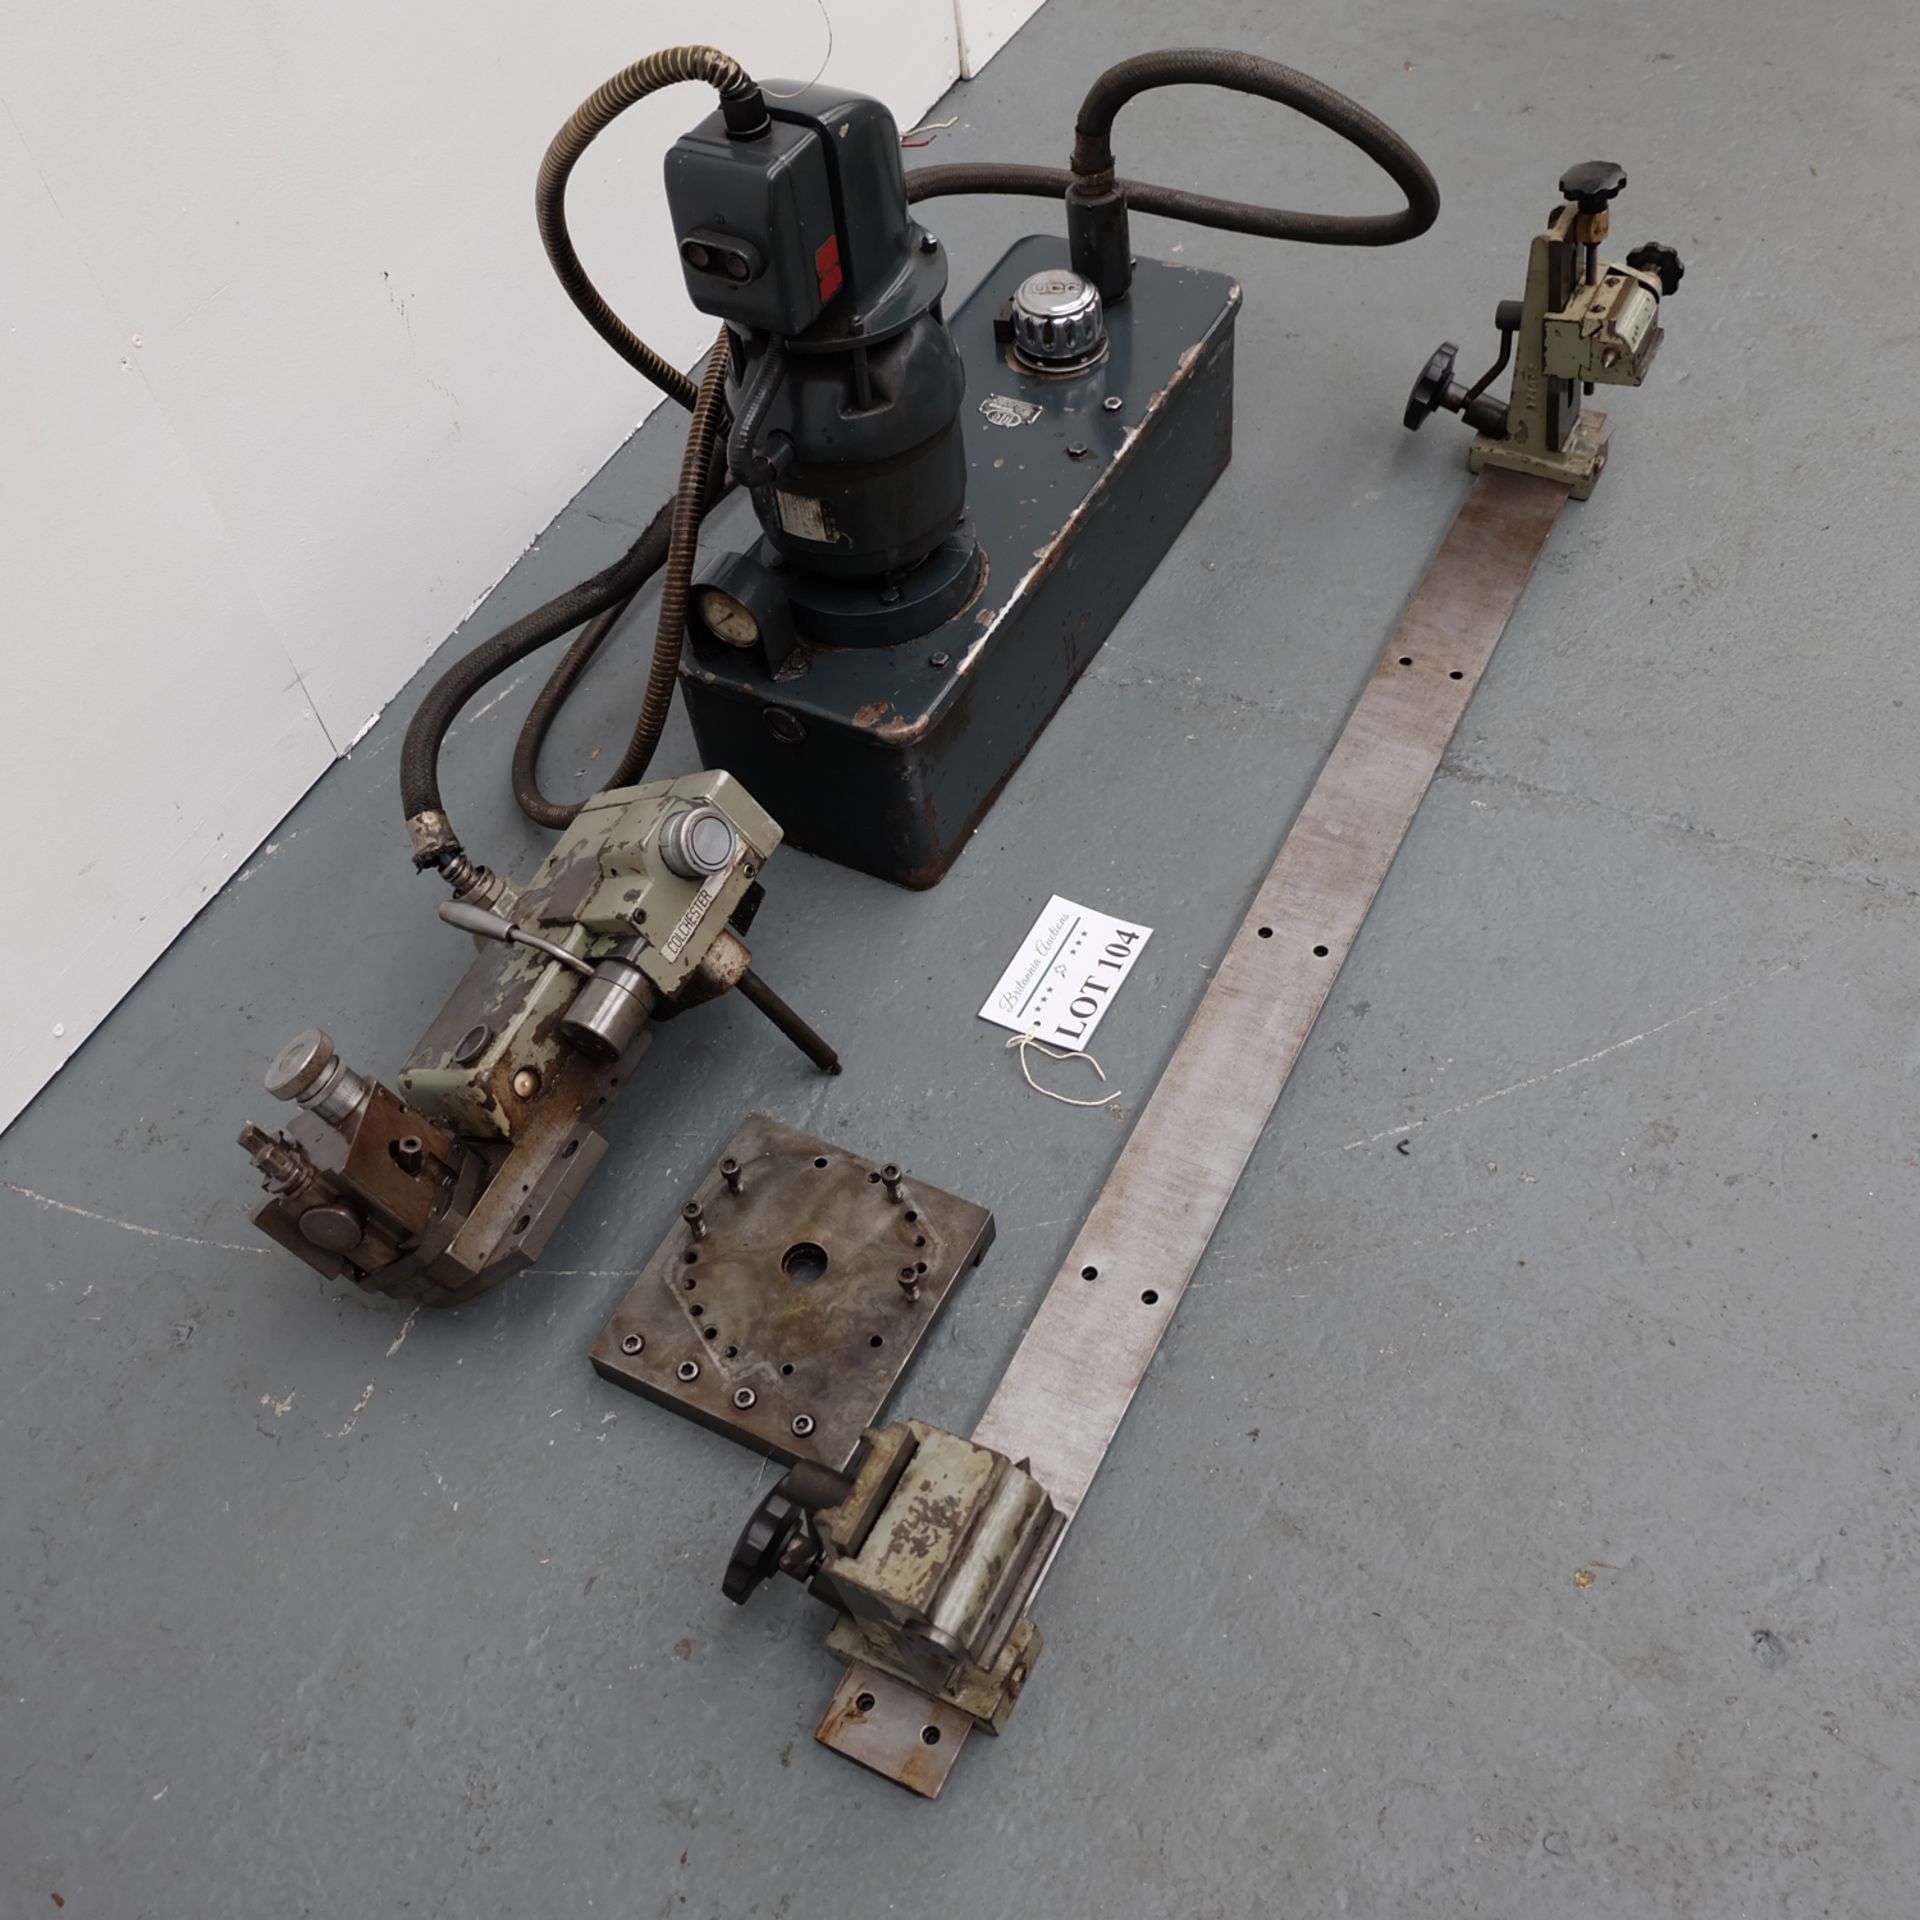 Hepworth Hydraulic Copying Attachment for Colchester Lathe. - Image 2 of 11